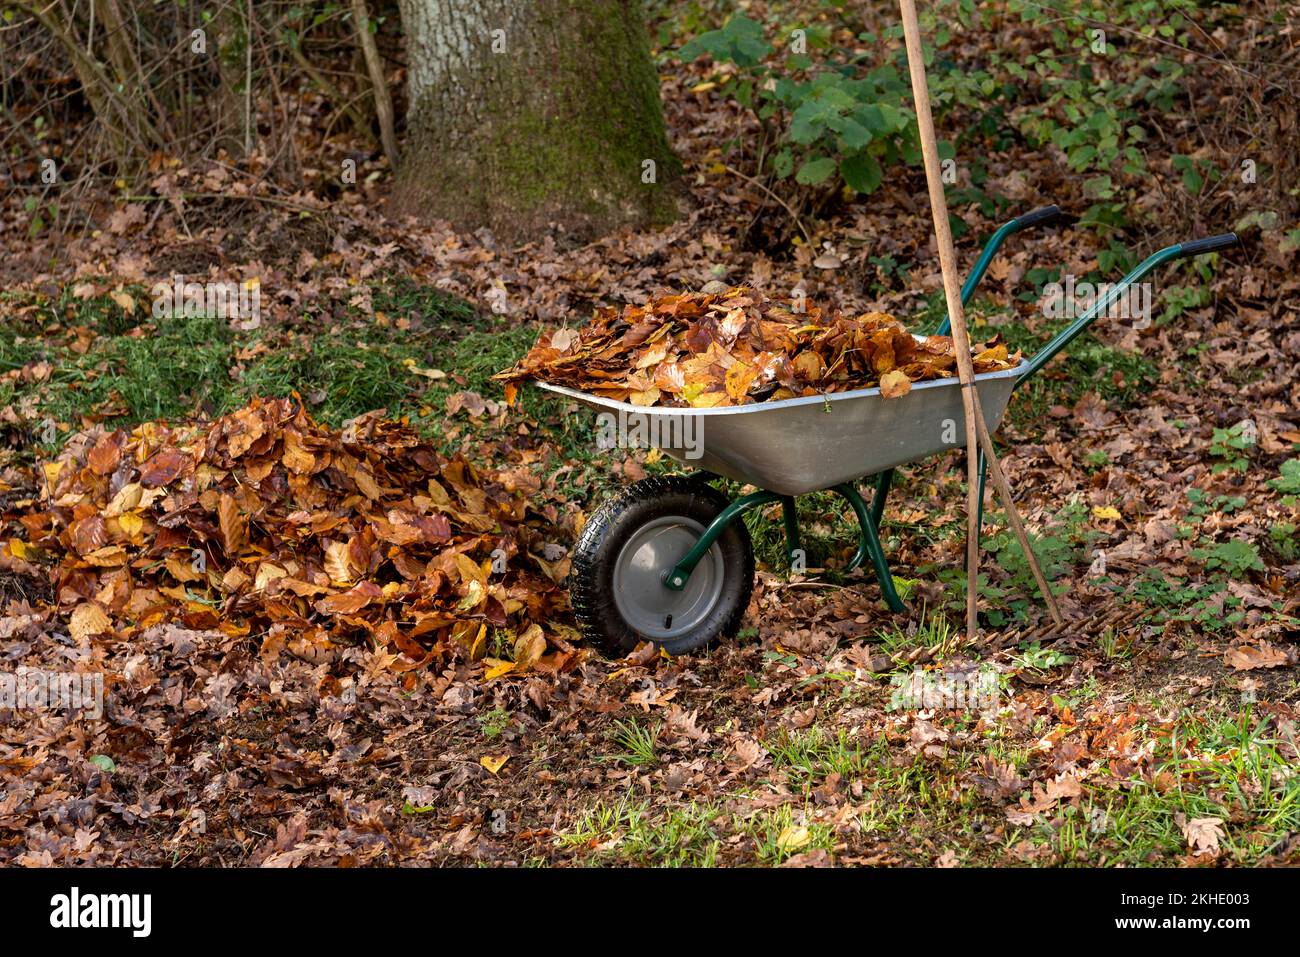 Autumn leaves in wheelbarrow with old rake in garden, hay rake with wooden tines, autumn coloured leaves, foliage, Germany, Europe Stock Photo